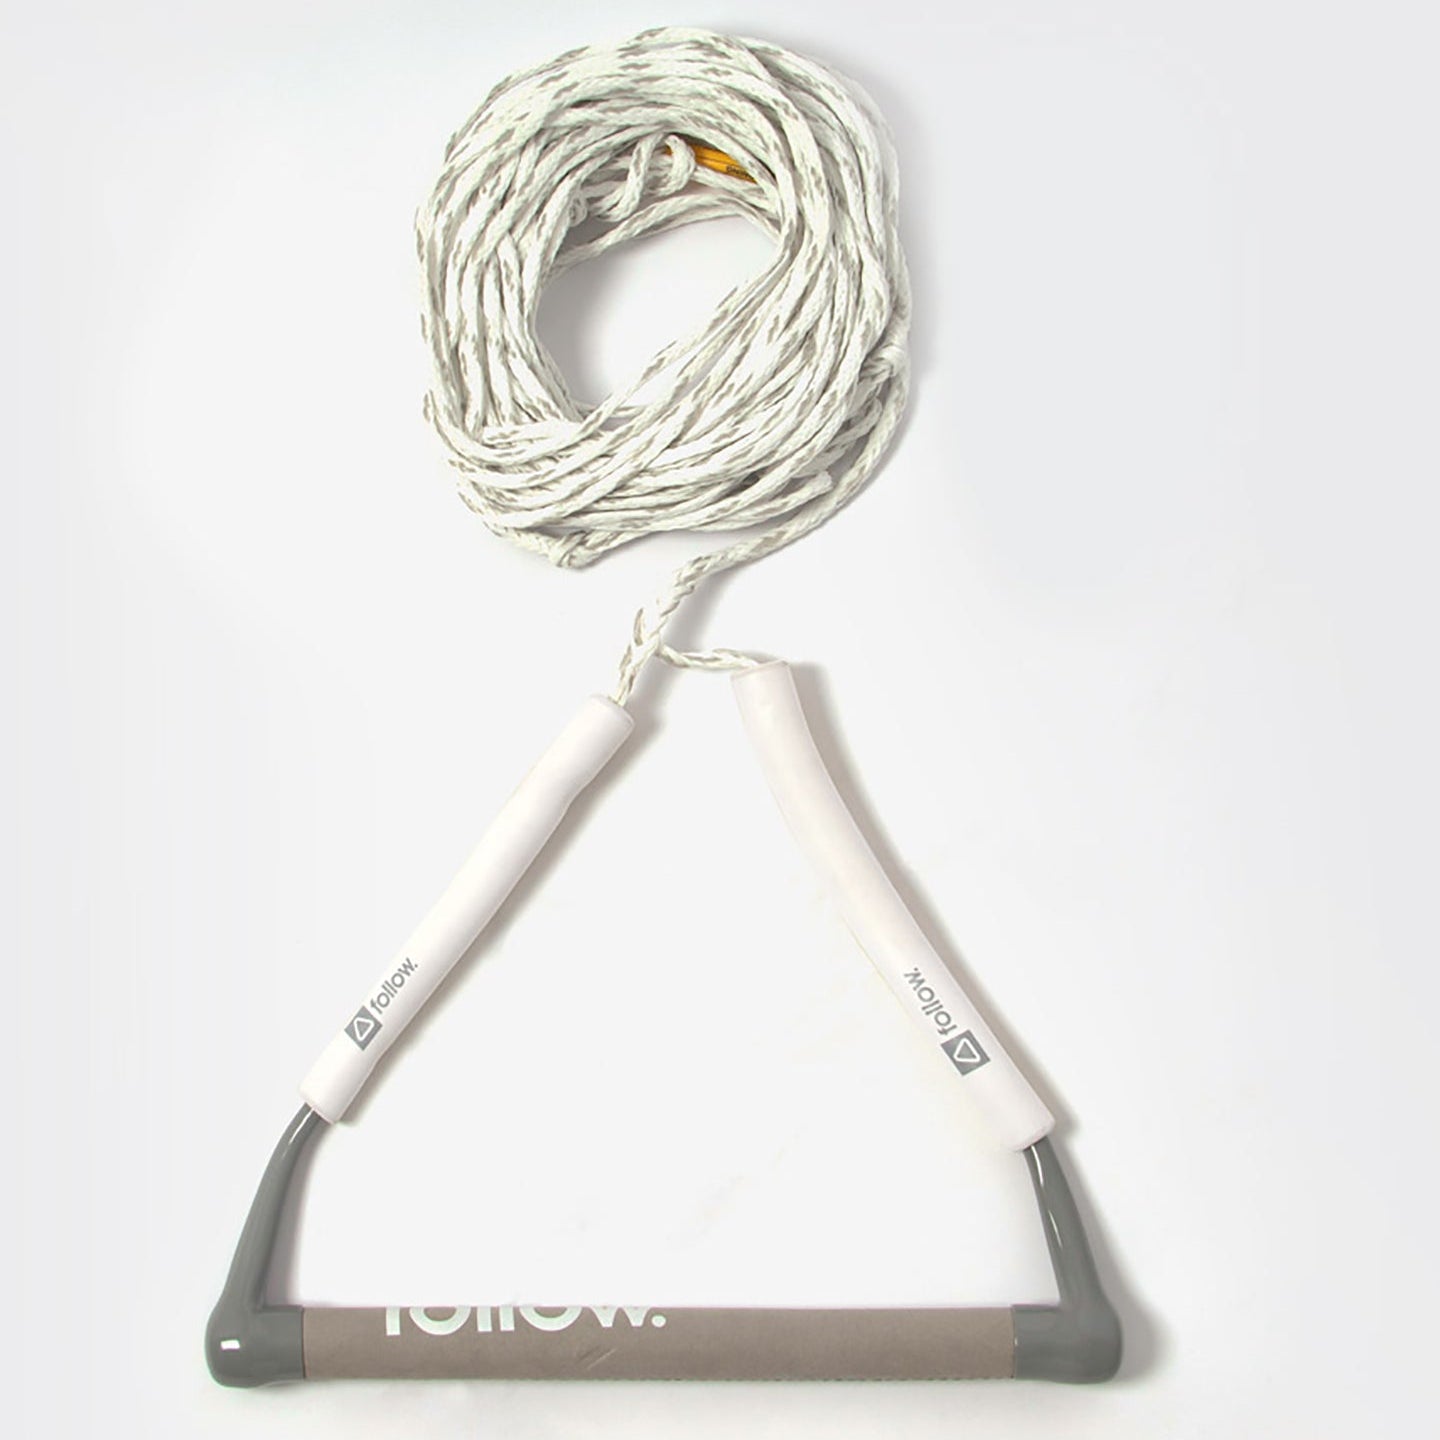 Follow The Basic Package Wake Rope & Handles